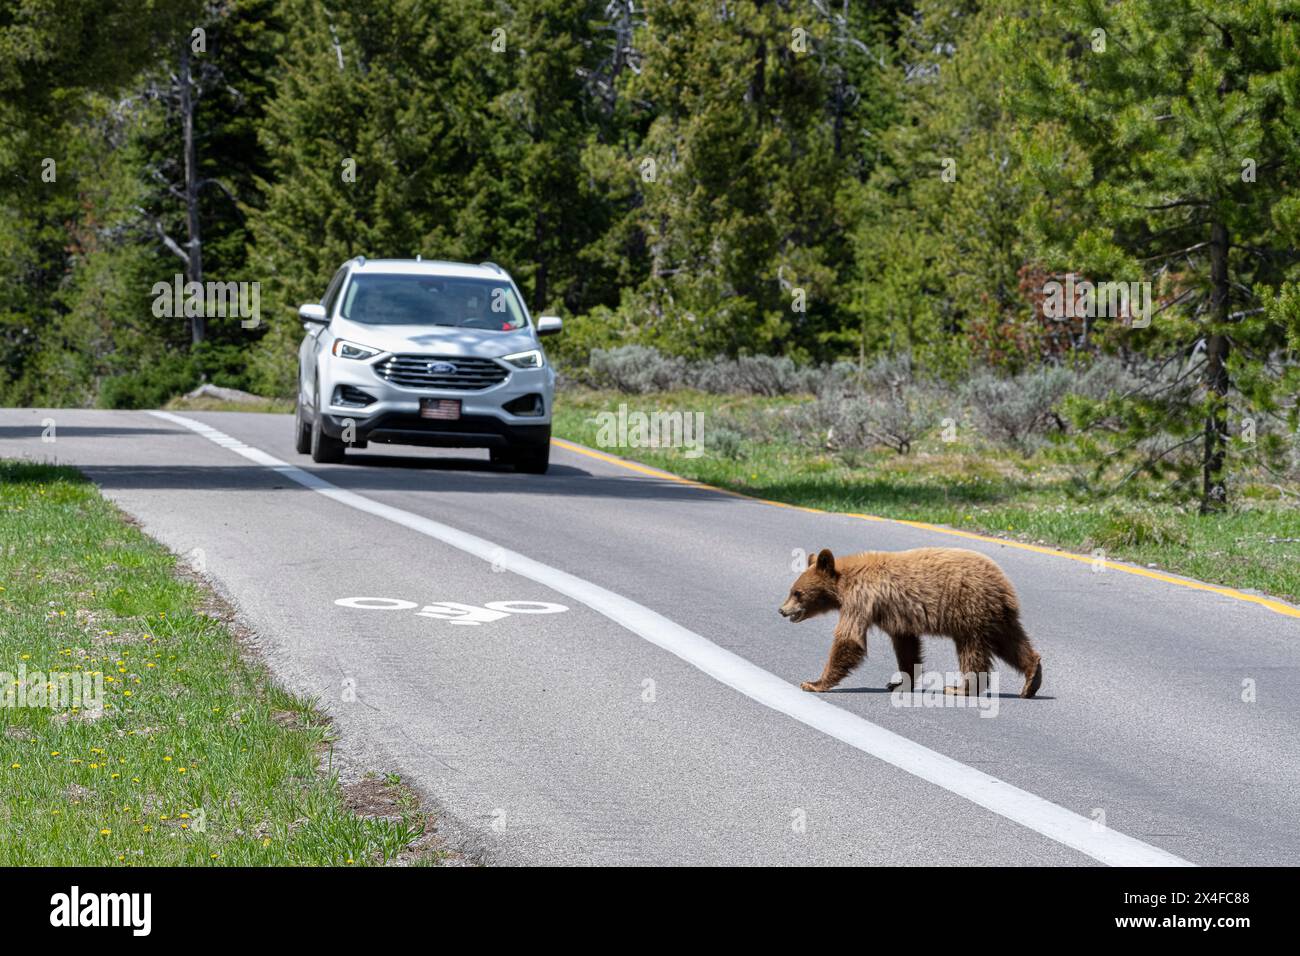 USA, Wyoming. Young cinnamon Black Bear crossing the highway with oncoming vehicle, Grand Teton National Park Stock Photo